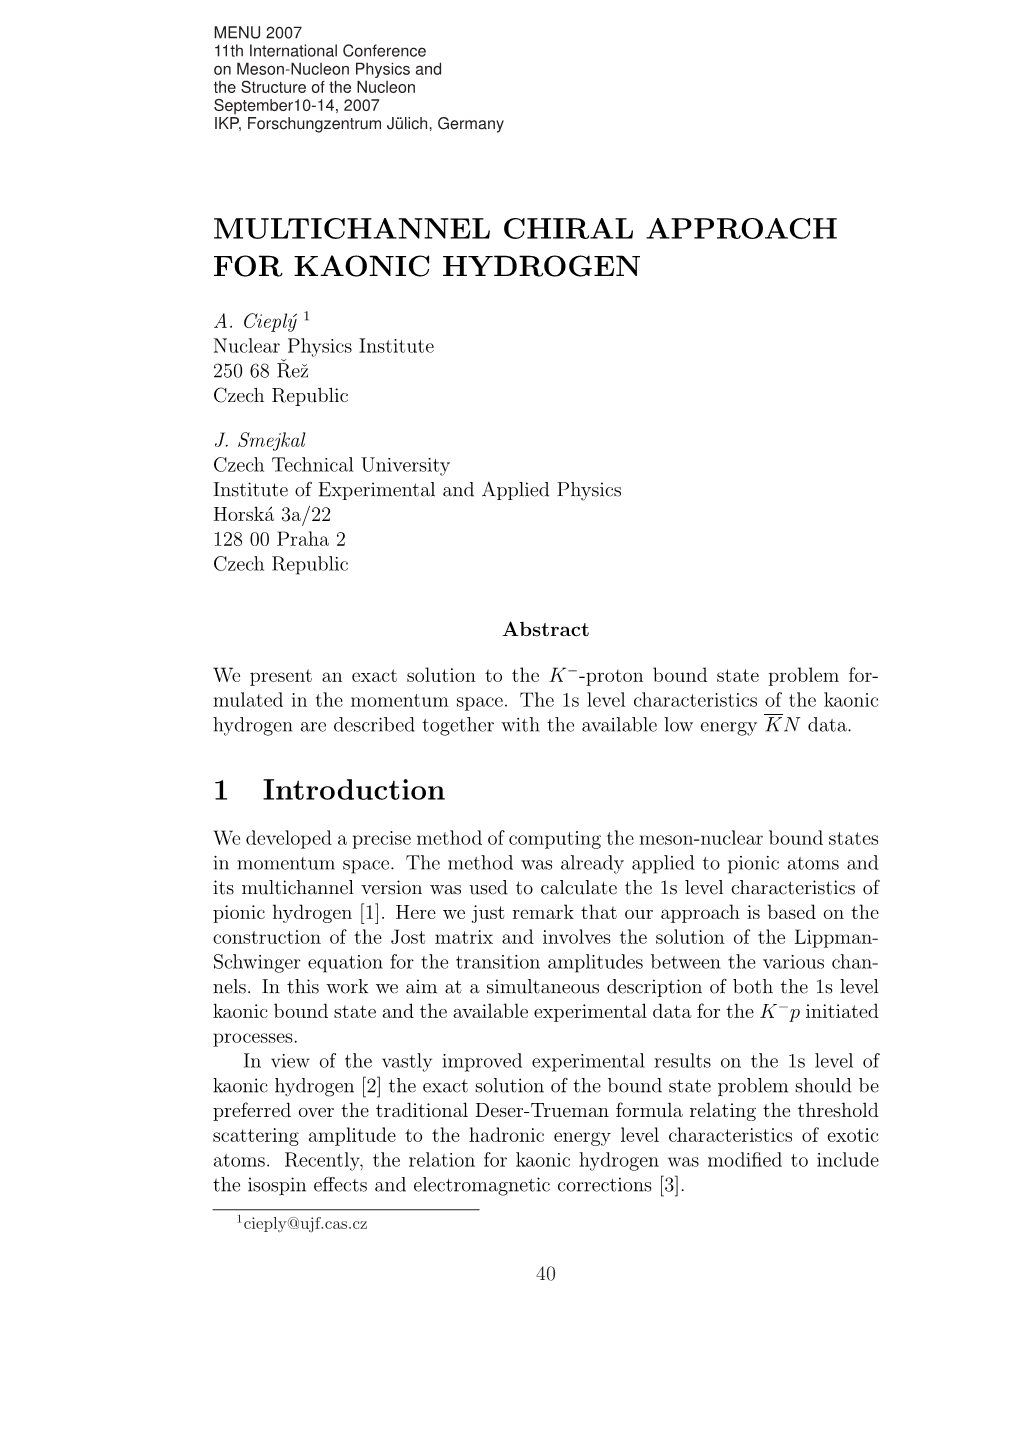 MULTICHANNEL CHIRAL APPROACH for KAONIC HYDROGEN 1 Introduction